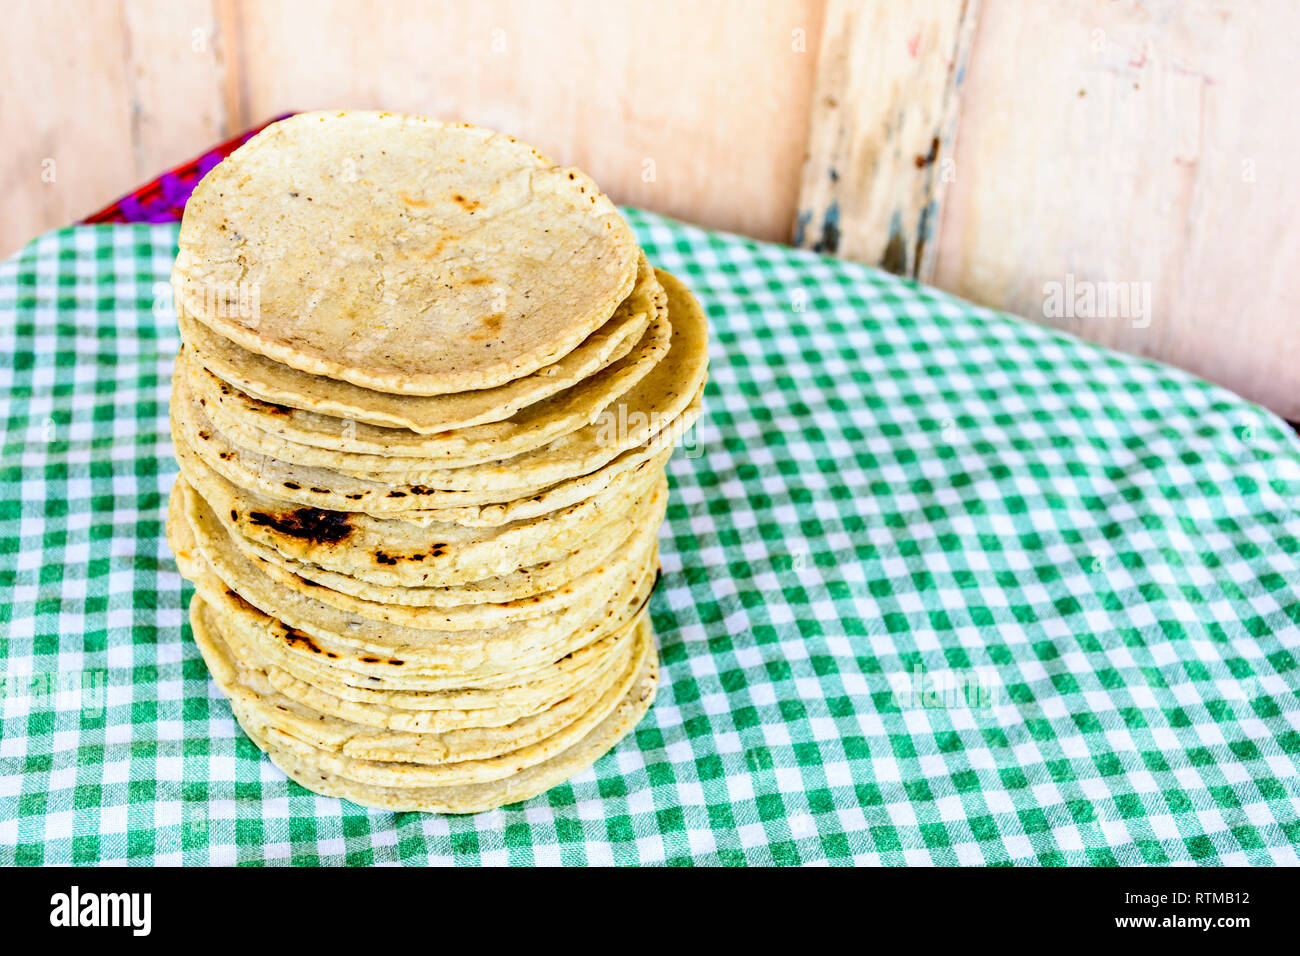 Stack of traditional handmade Guatemalan corn tortillas a staple food in Guatemala on green checkered tablecloth Stock Photo